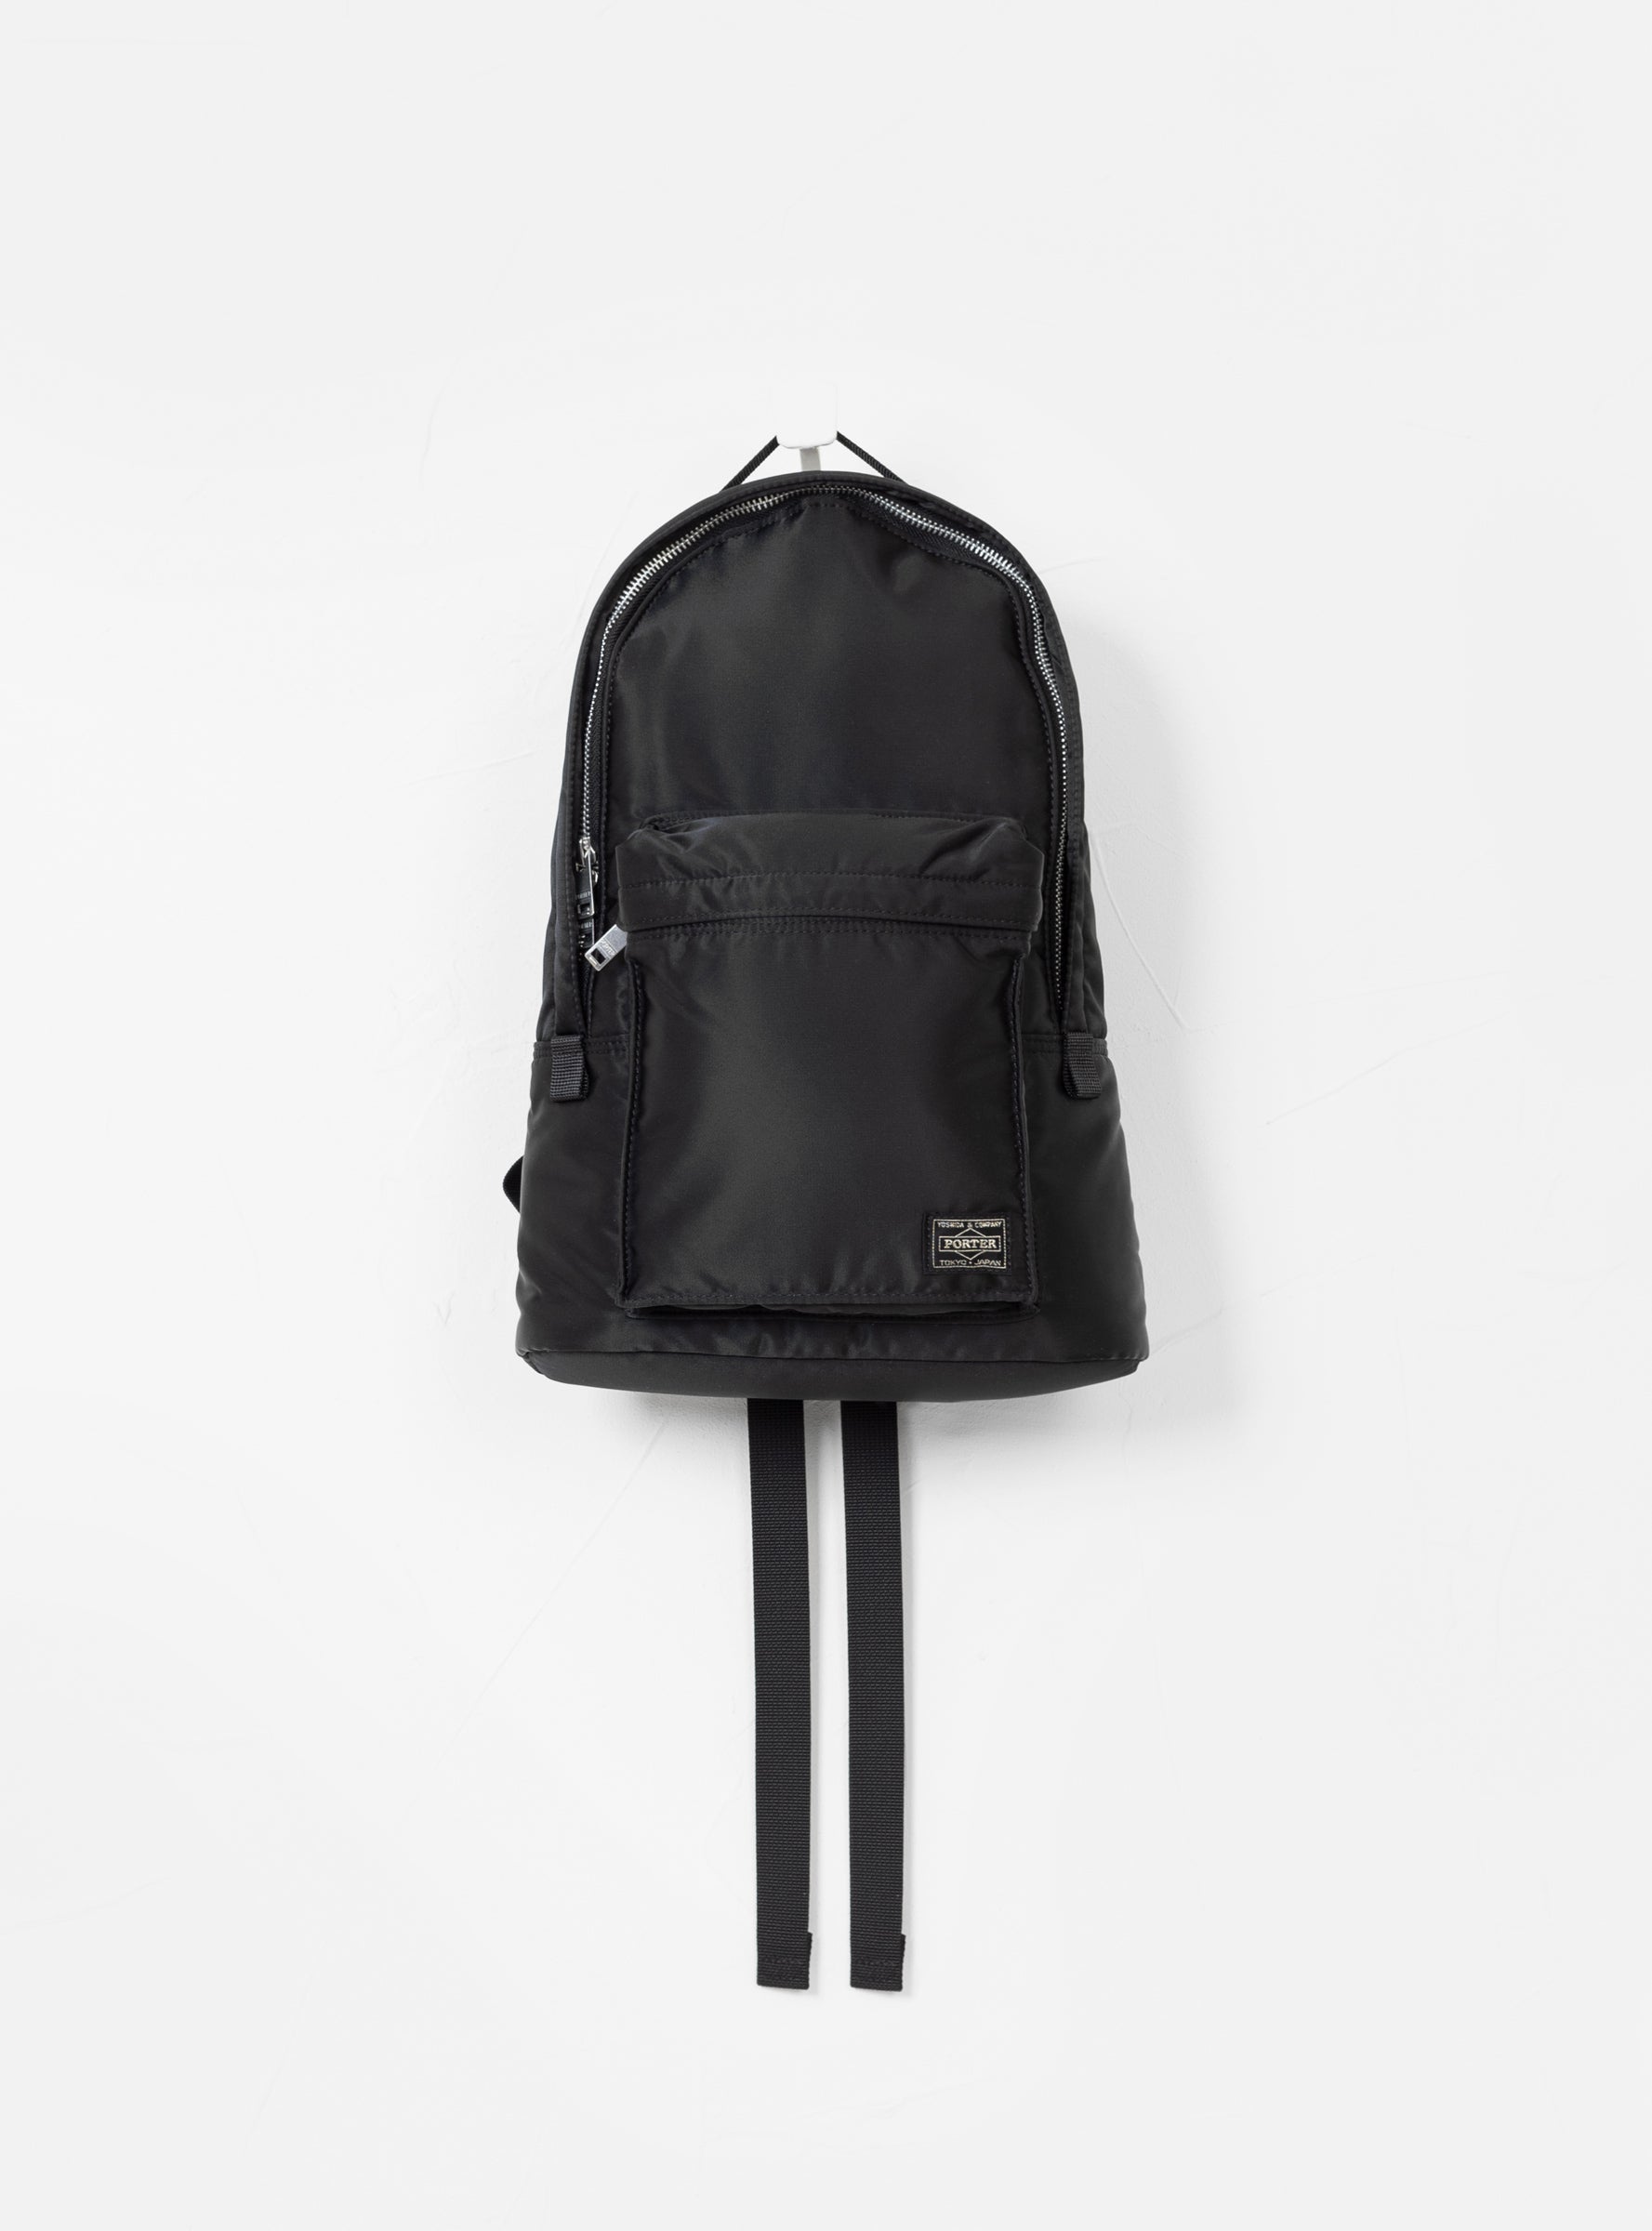 TANKER Day Backpack - Small - Black by Porter Yoshida & Co